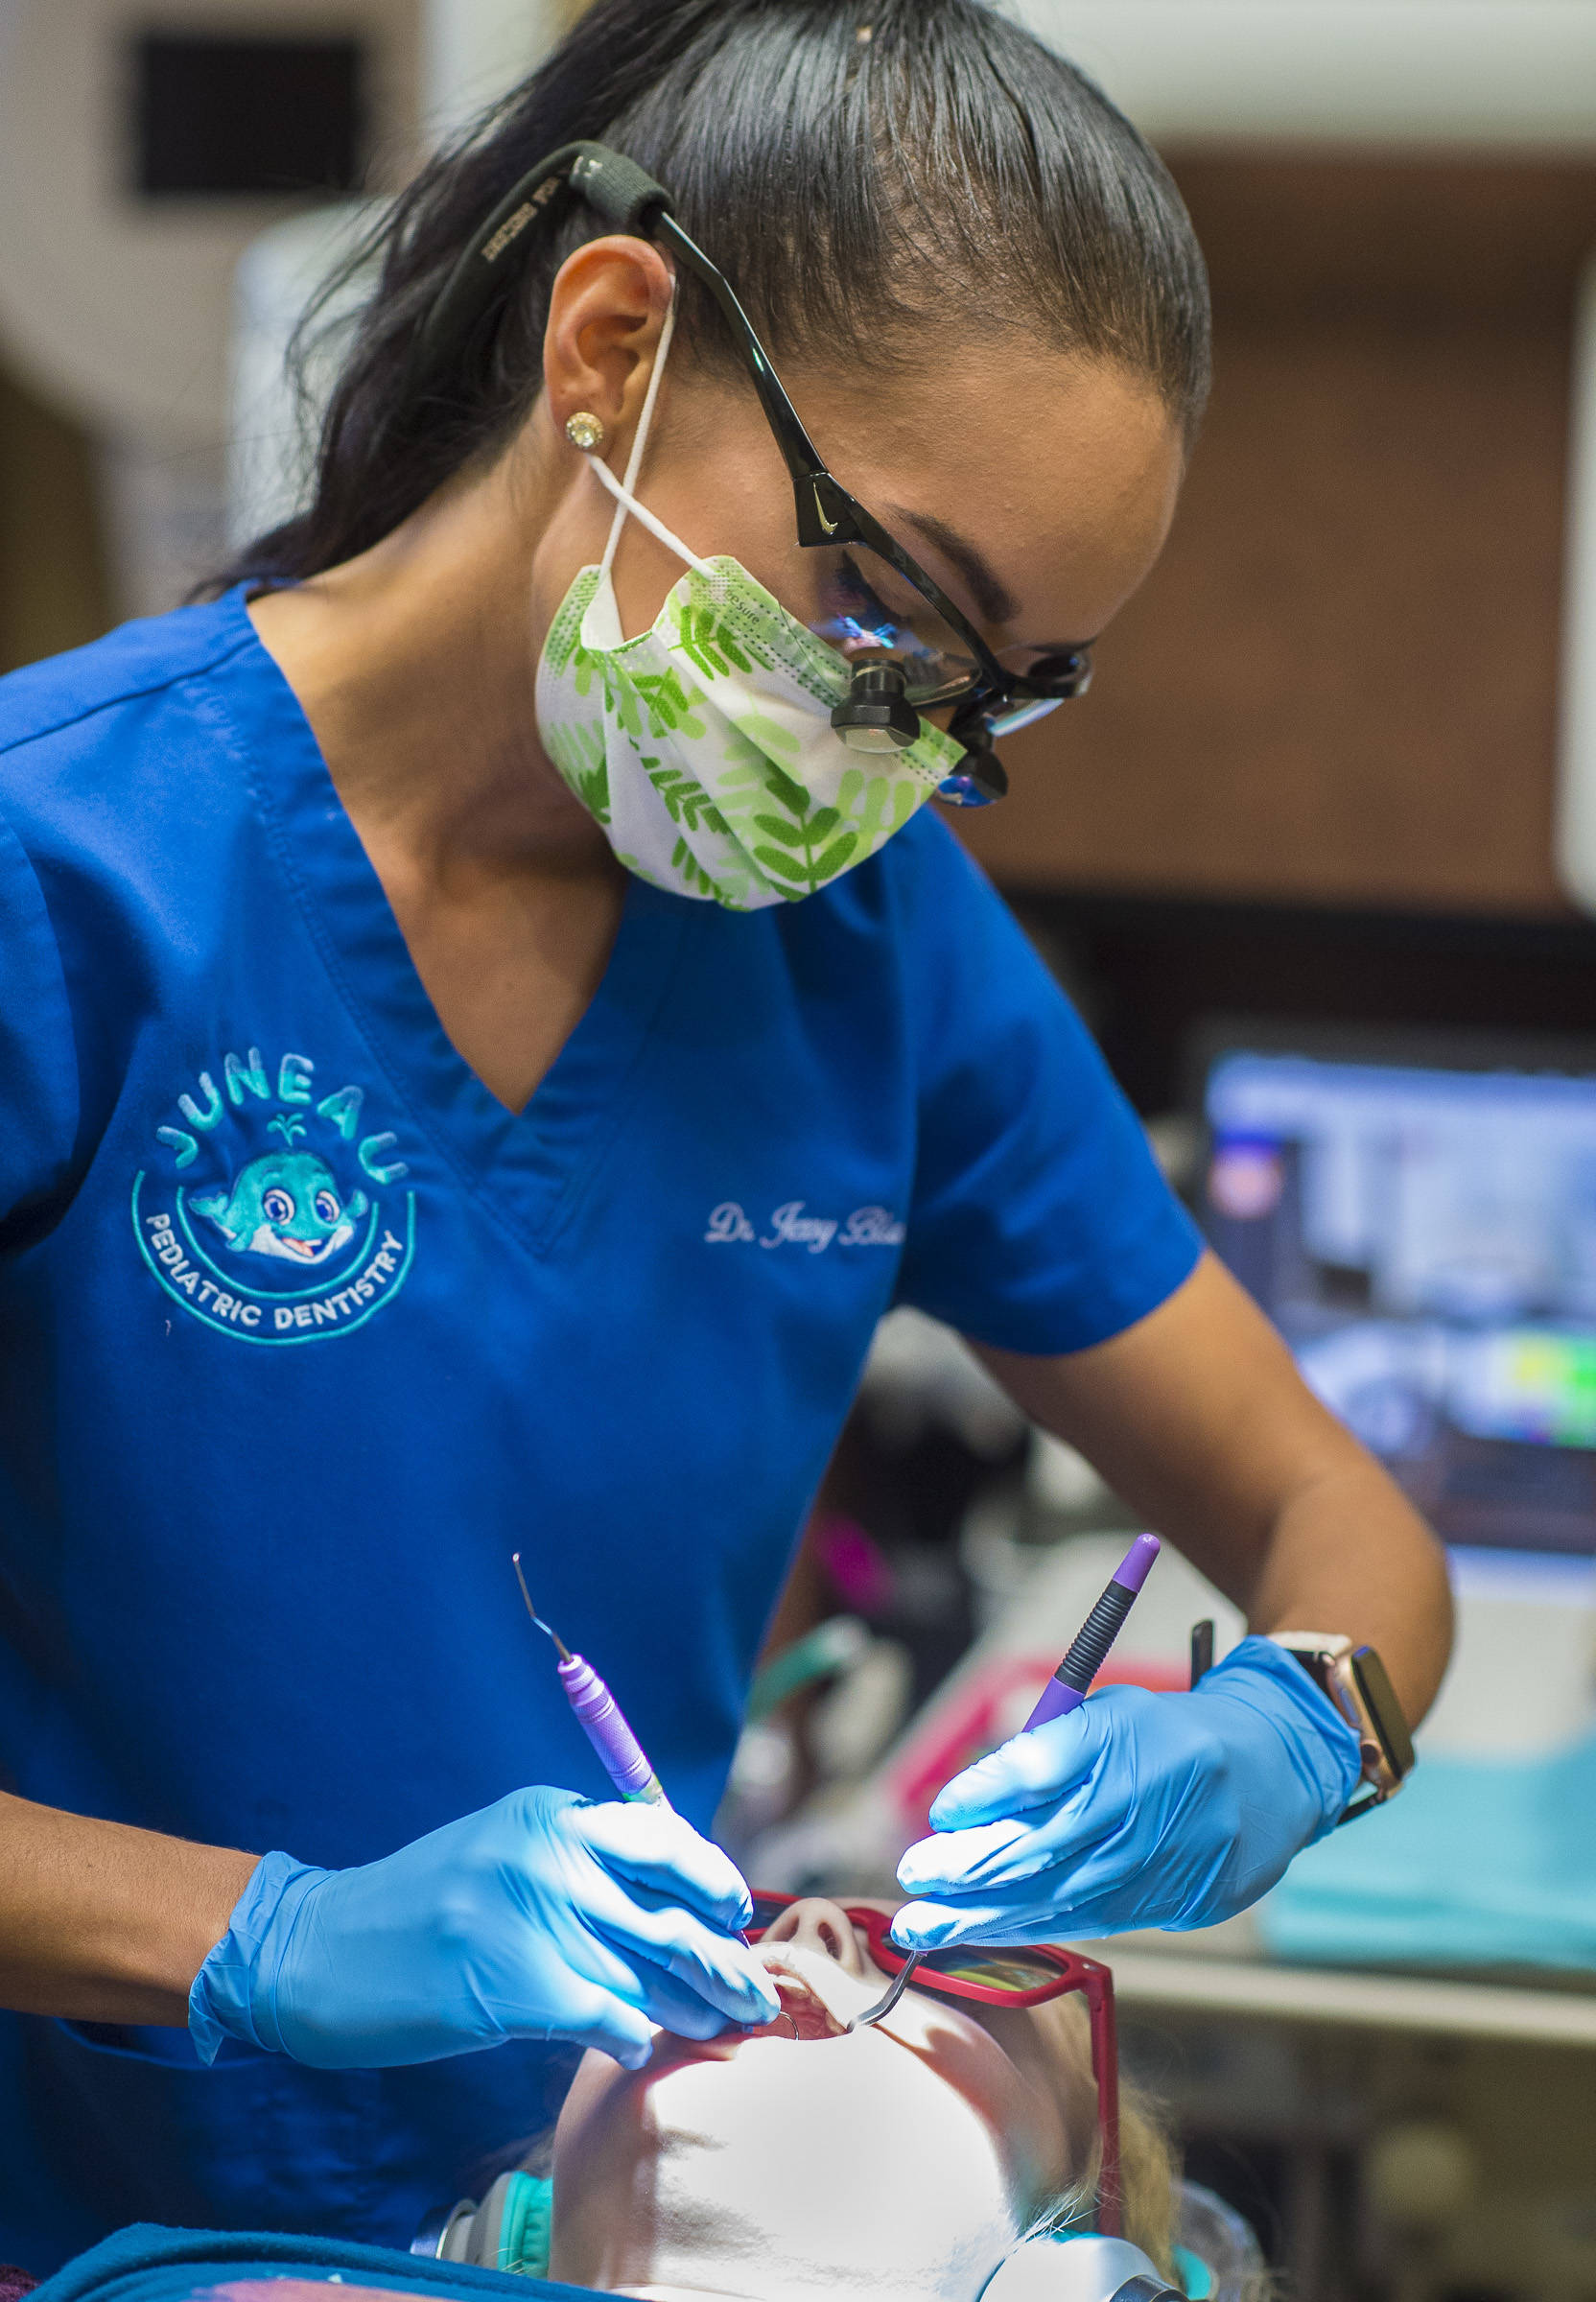 Dr. Jessica Blanco, of Juneau Pediatric Dentistry, provides a checkup on Tynly Booth, 8, on Monday, Jan. 14, 2019. Tynly was given a topical fluoride varnish as part of her checkup. (Michael Penn | Juneau Empire)